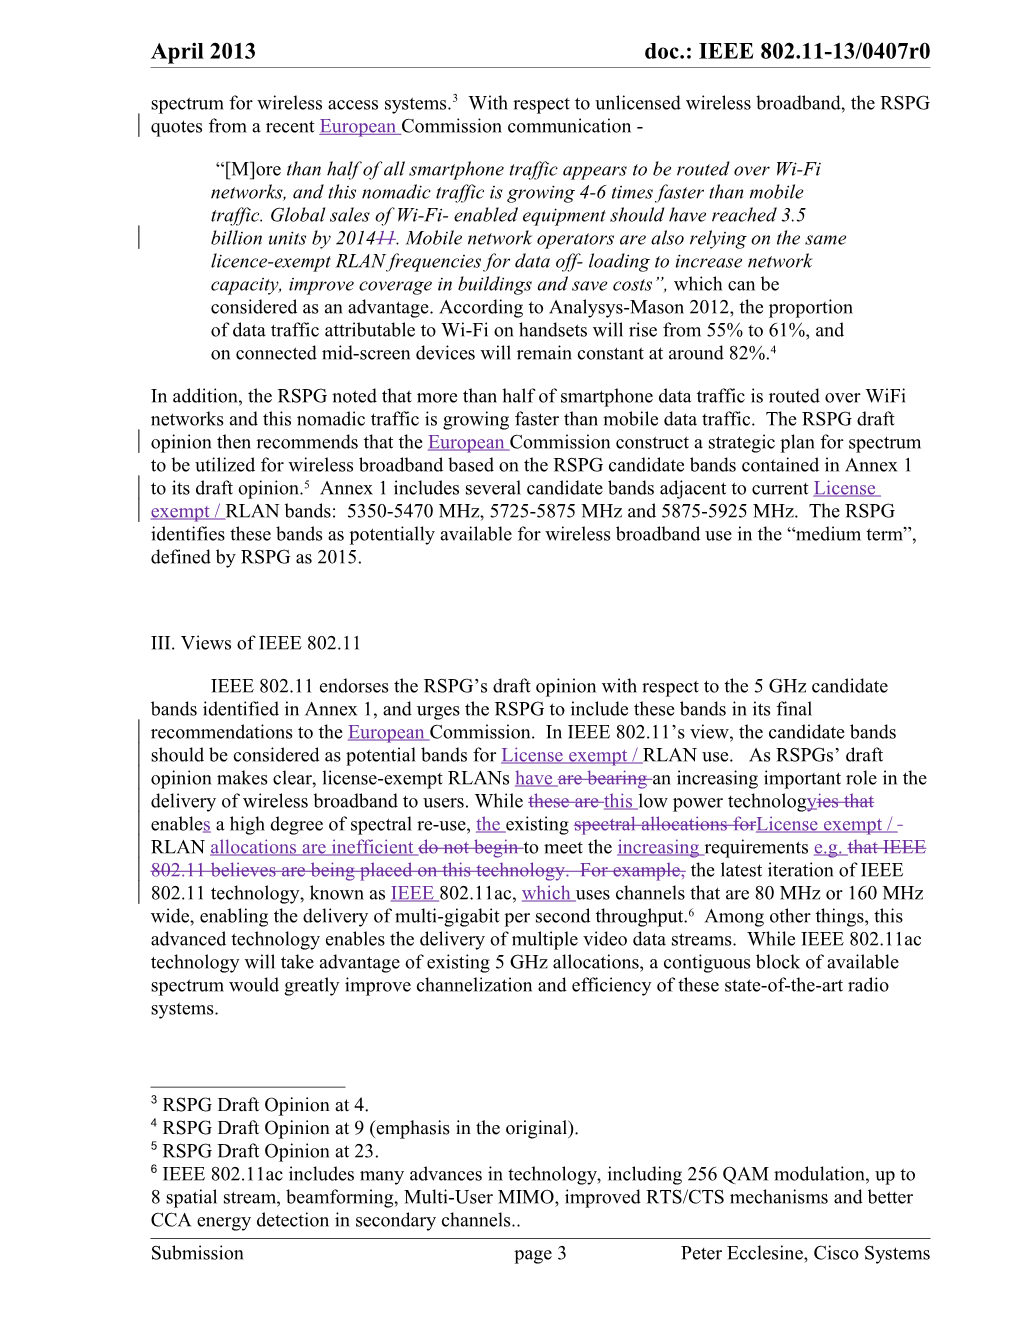 IEEE 802.11 Response to The